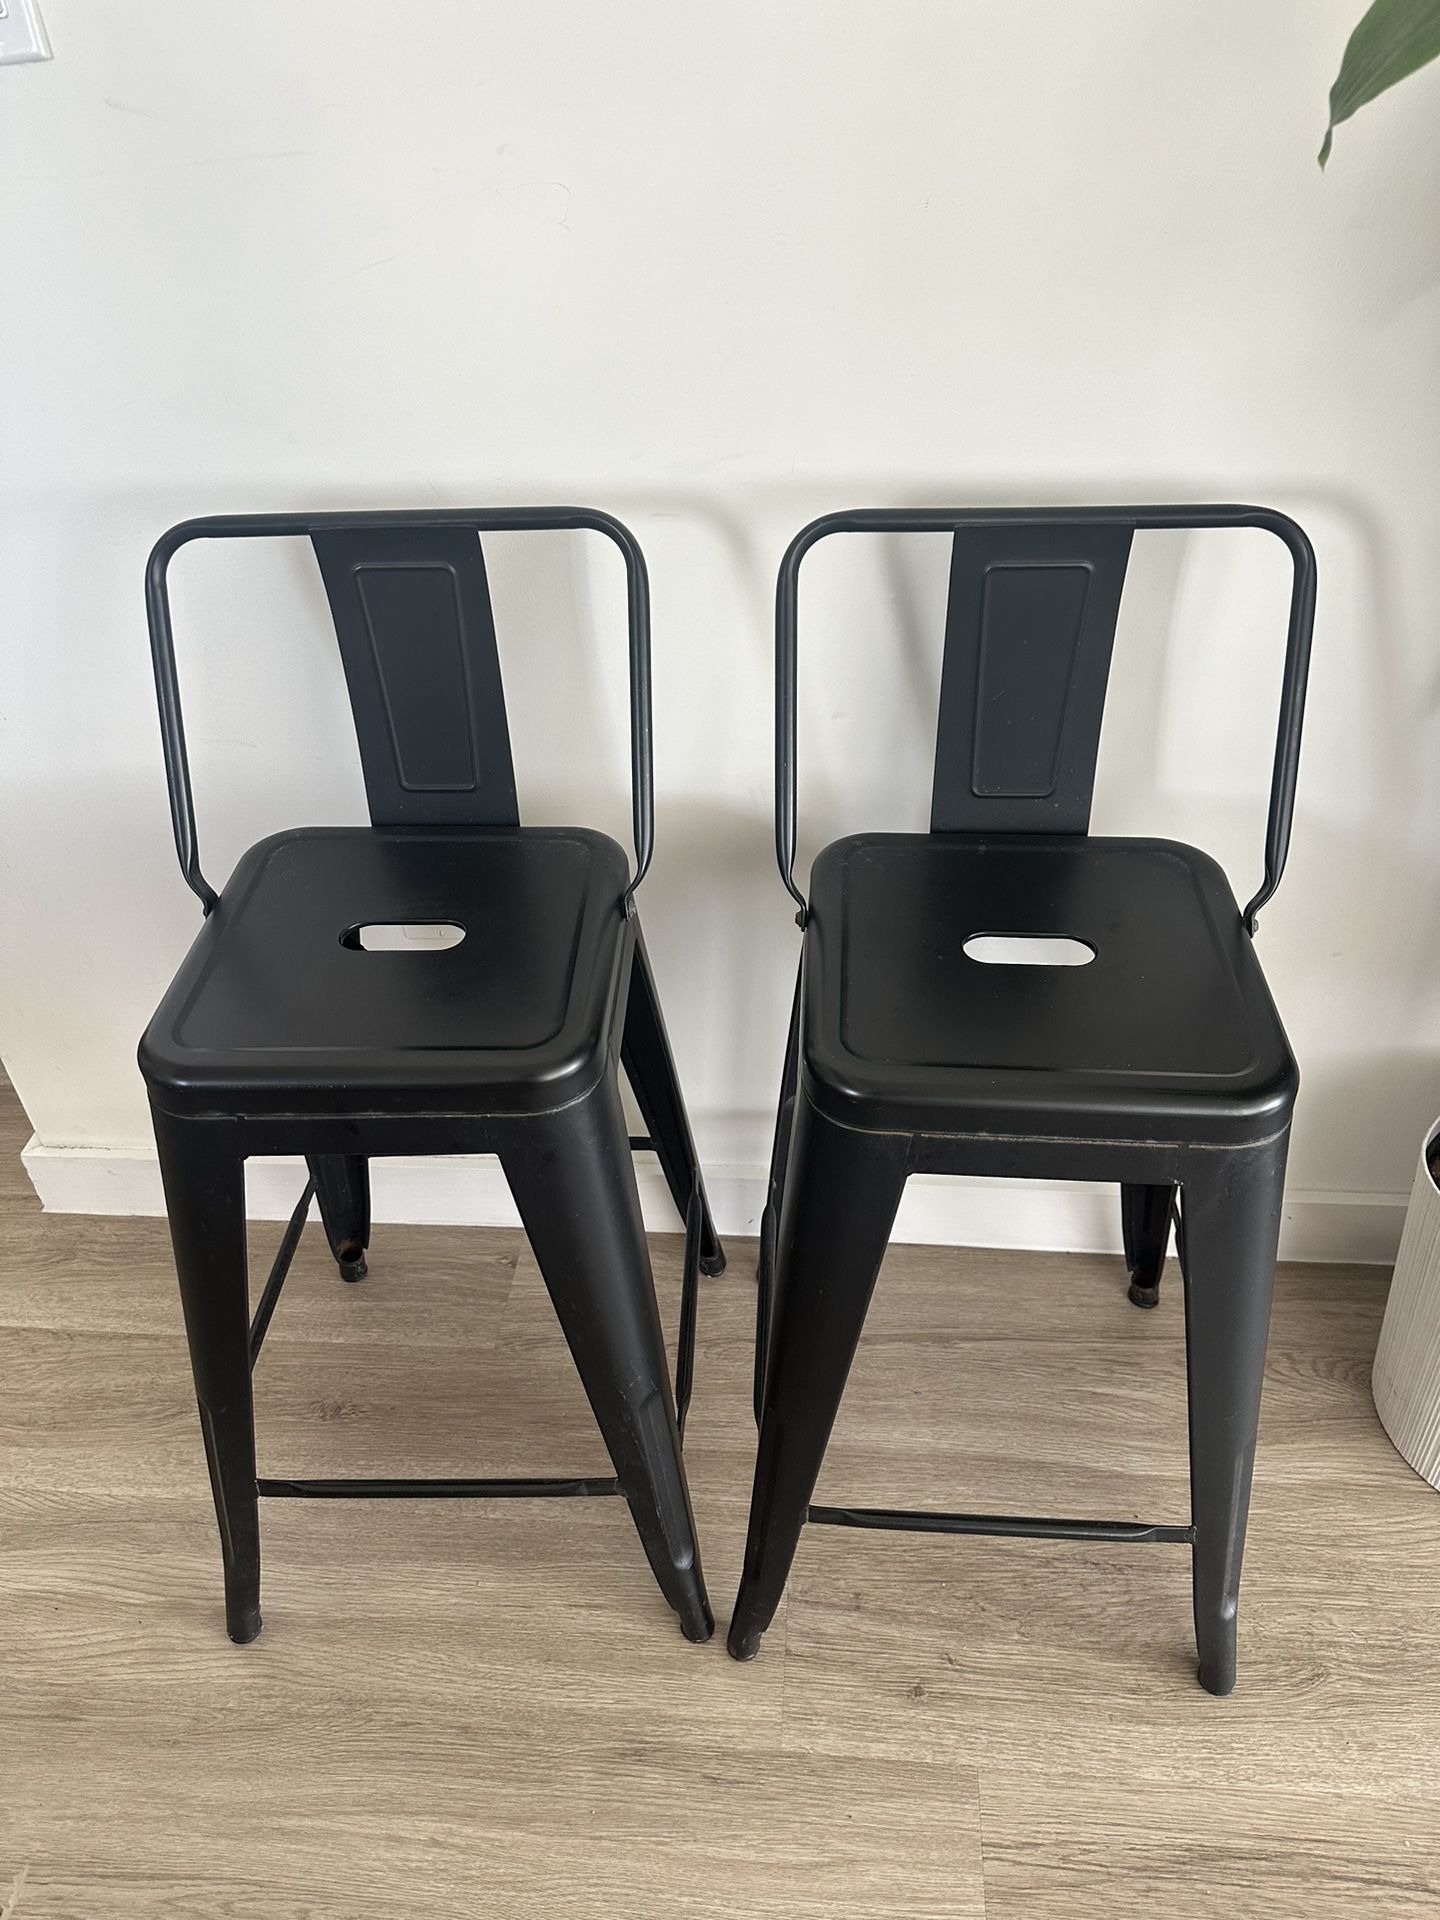 Chairs / Stools (x2)